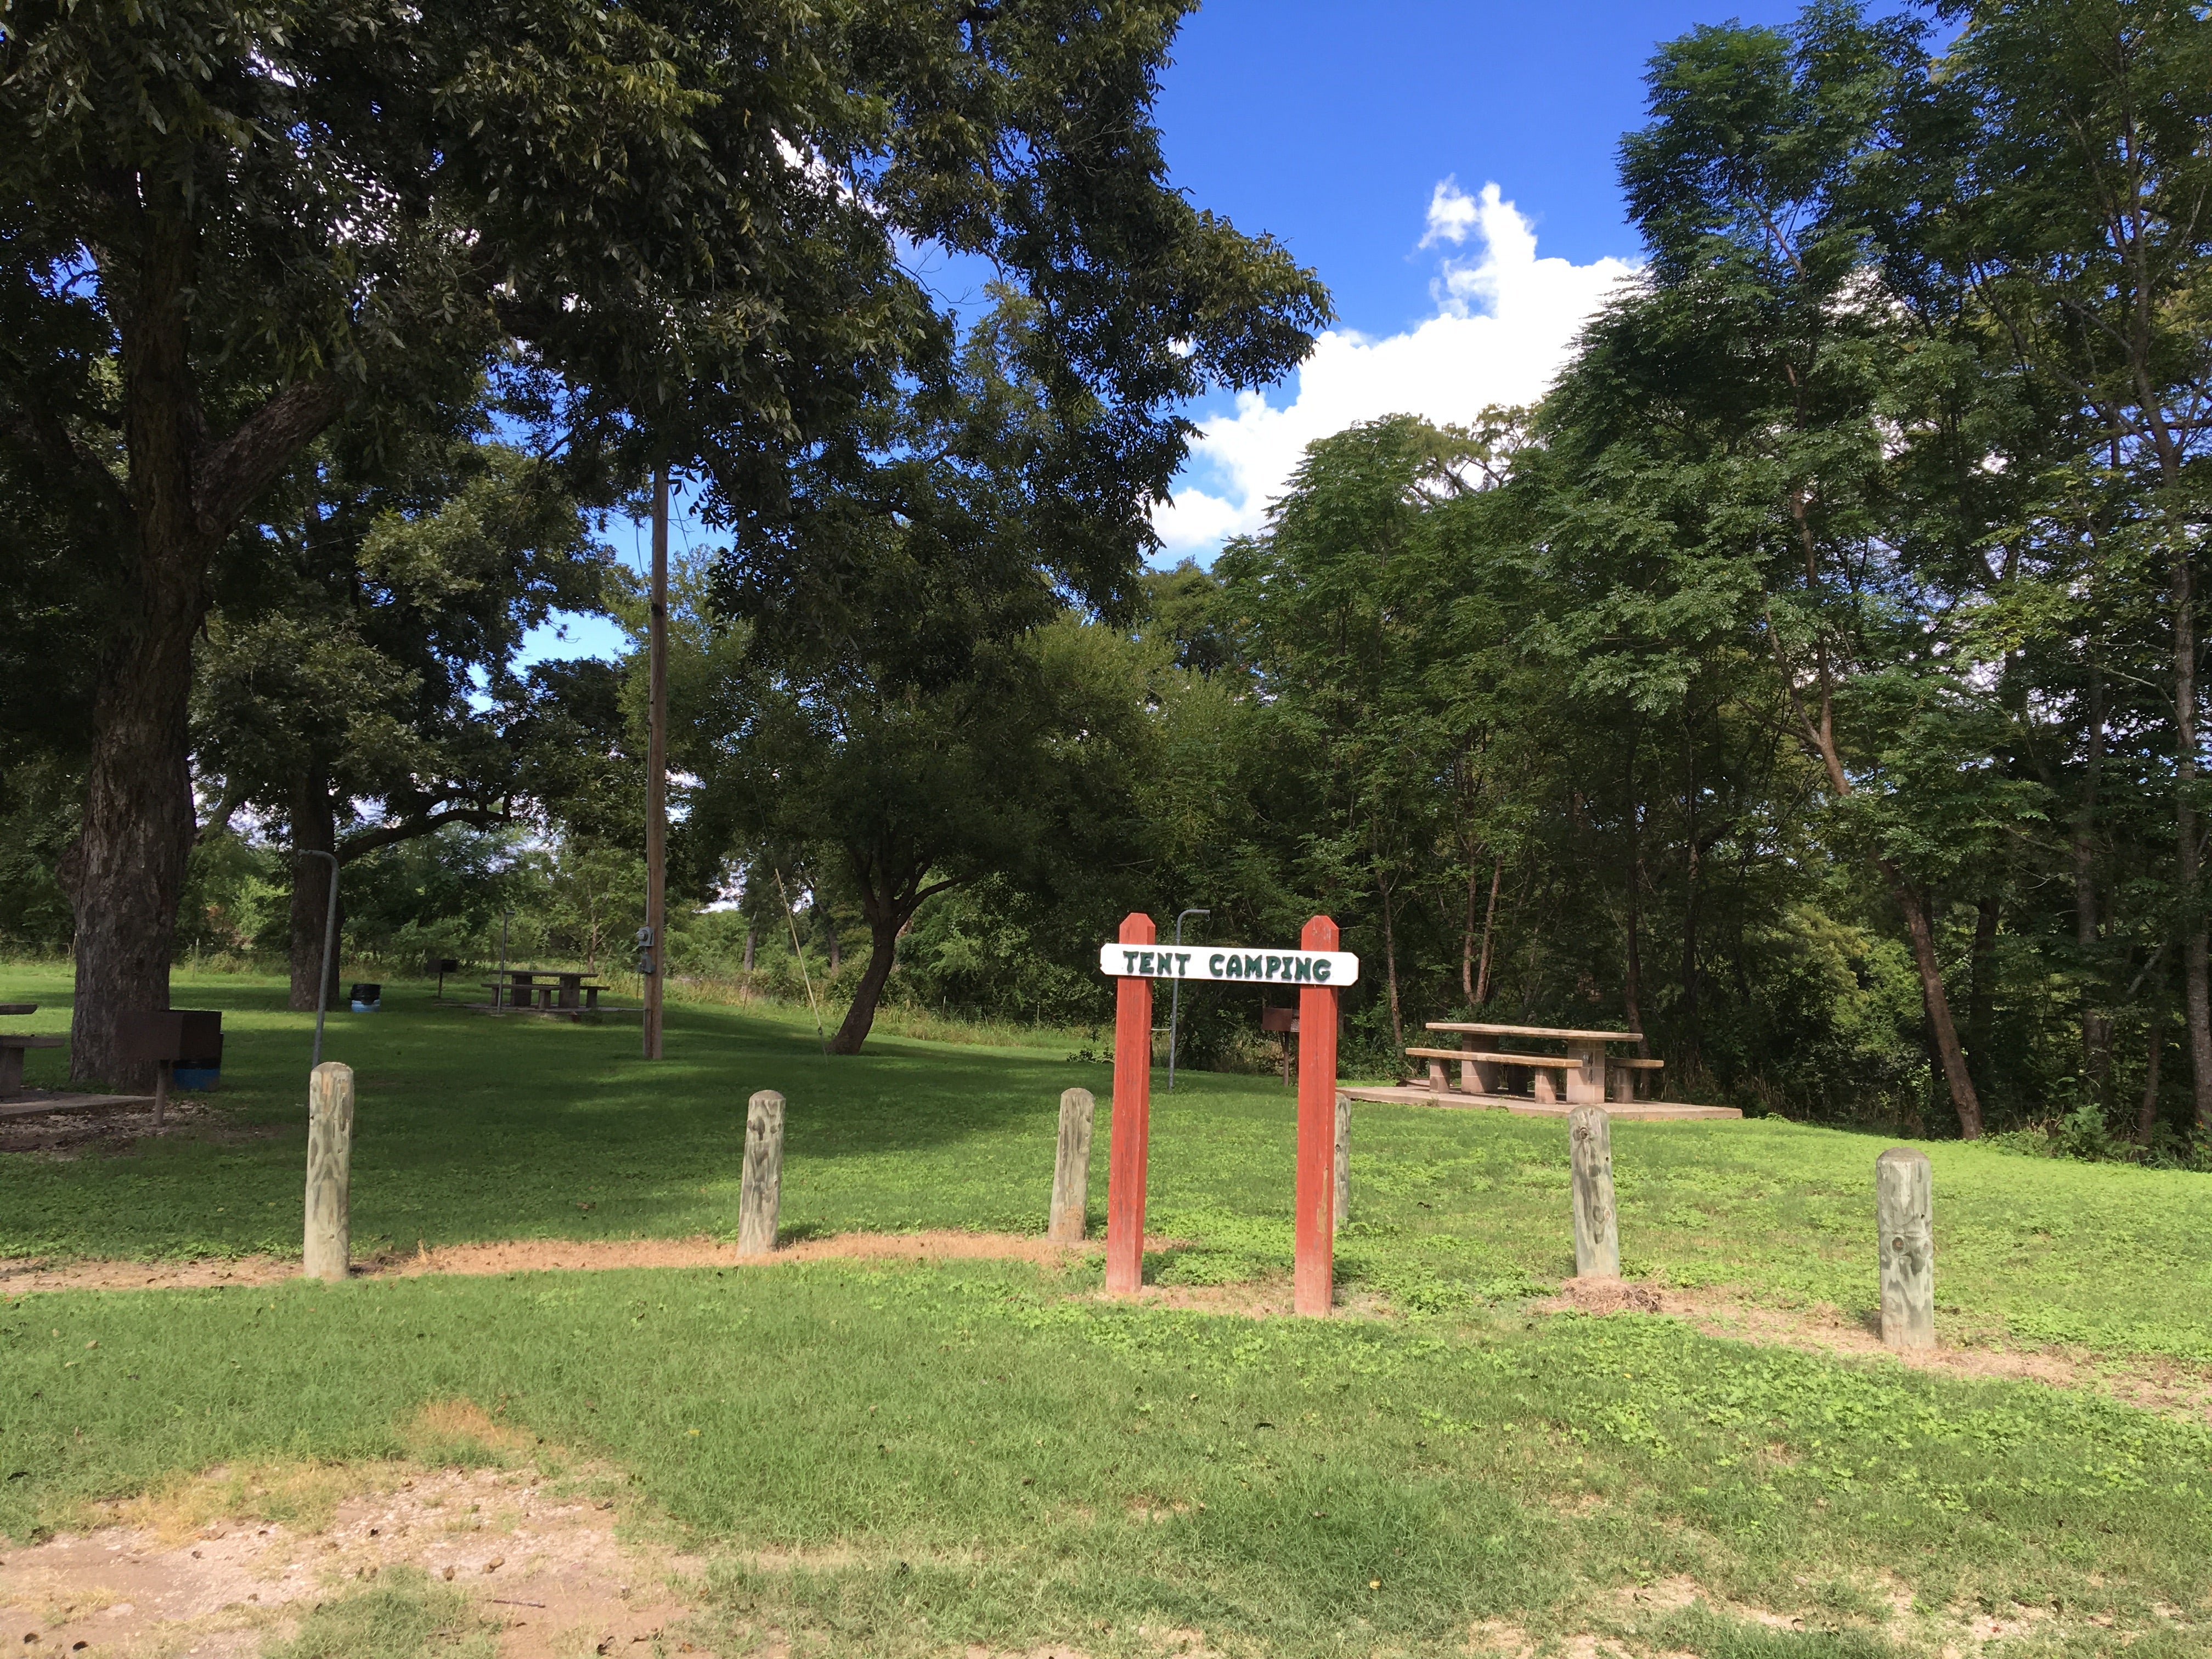 Camper submitted image from Castroville Regional Park - 2